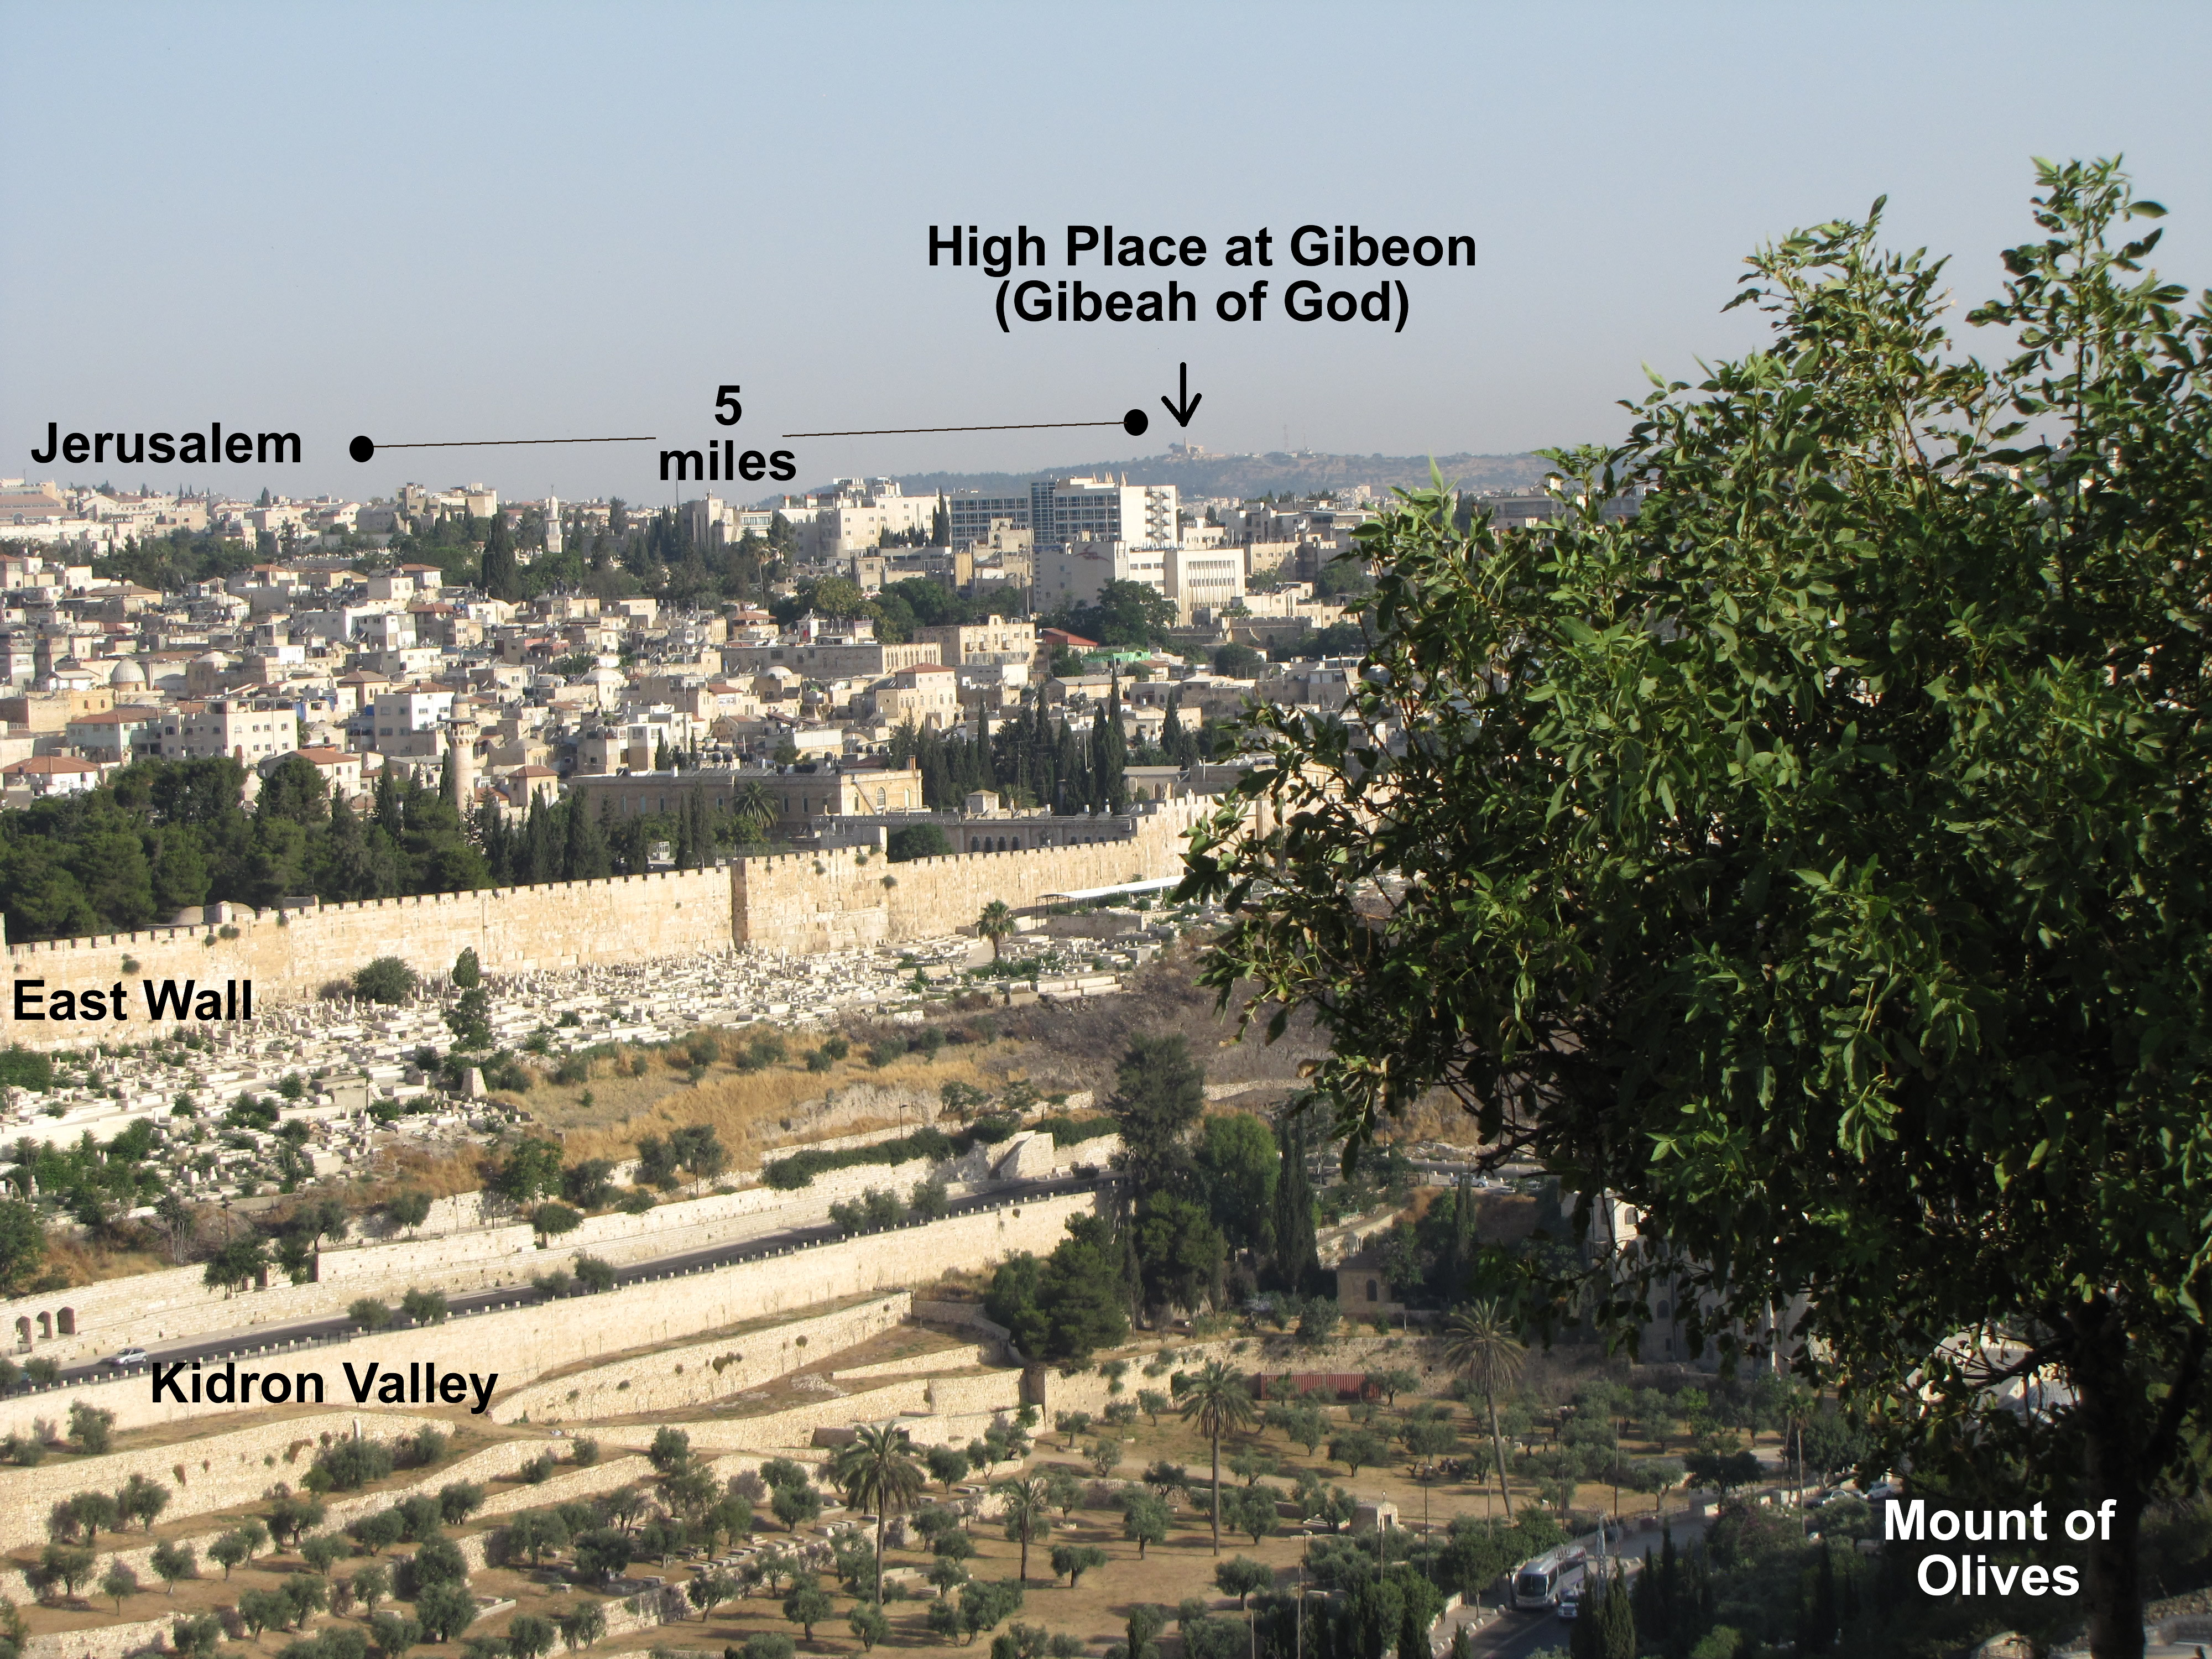 Looking NW from the third summit on the Mount of Olives at the High Place  of Gibeon or Gibeah of God